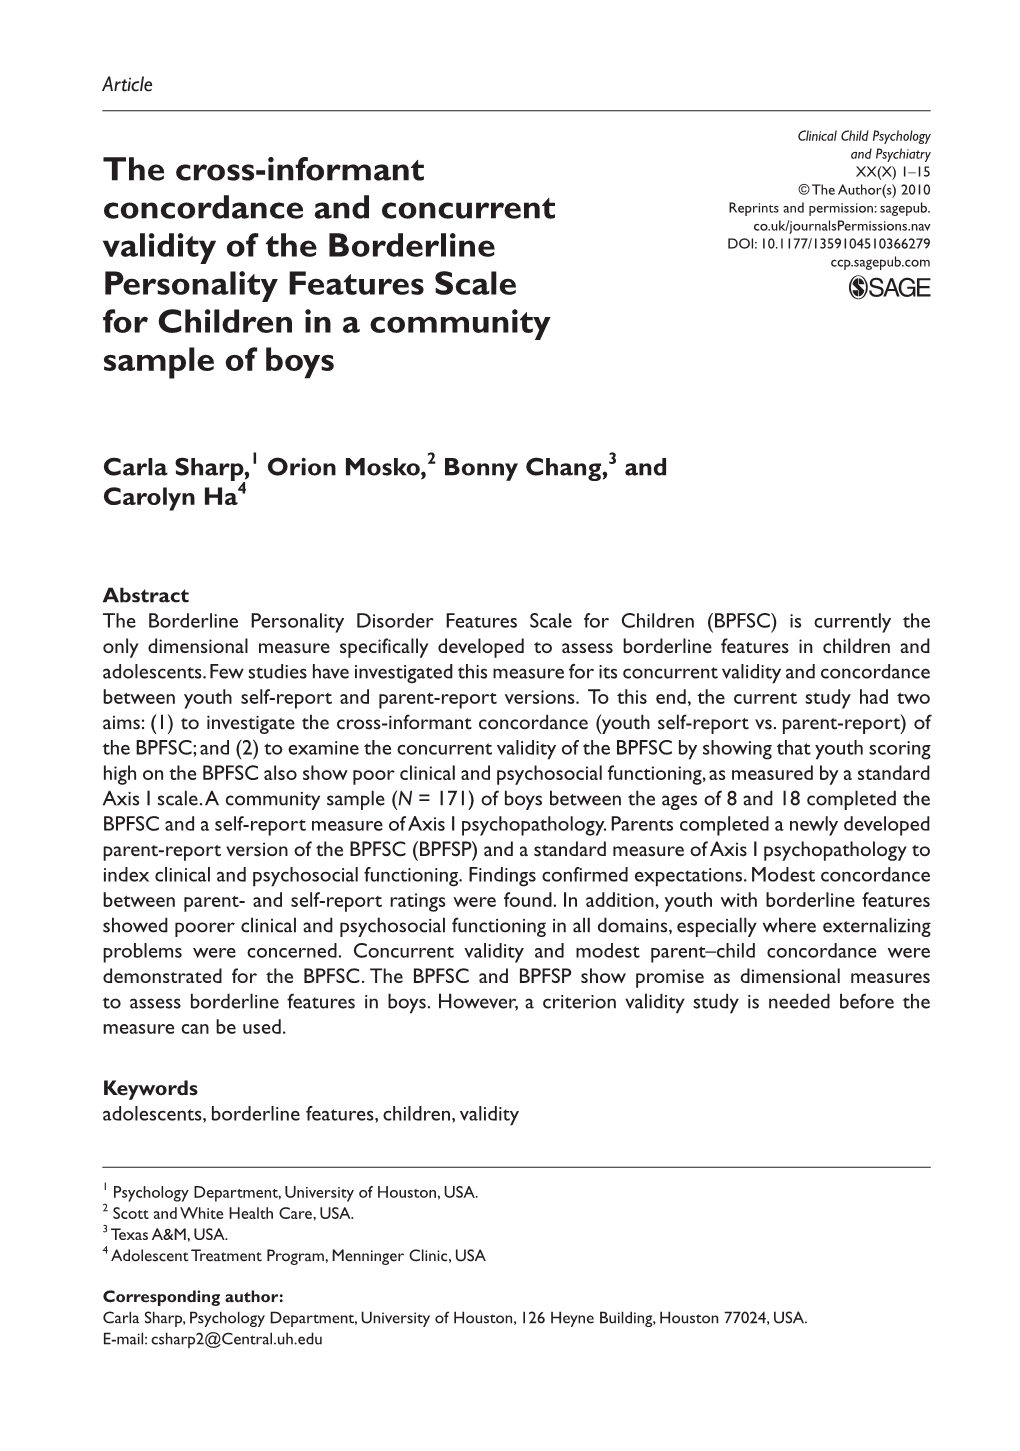 The Cross-Informant Concordance and Concurrent Validity of the Borderline